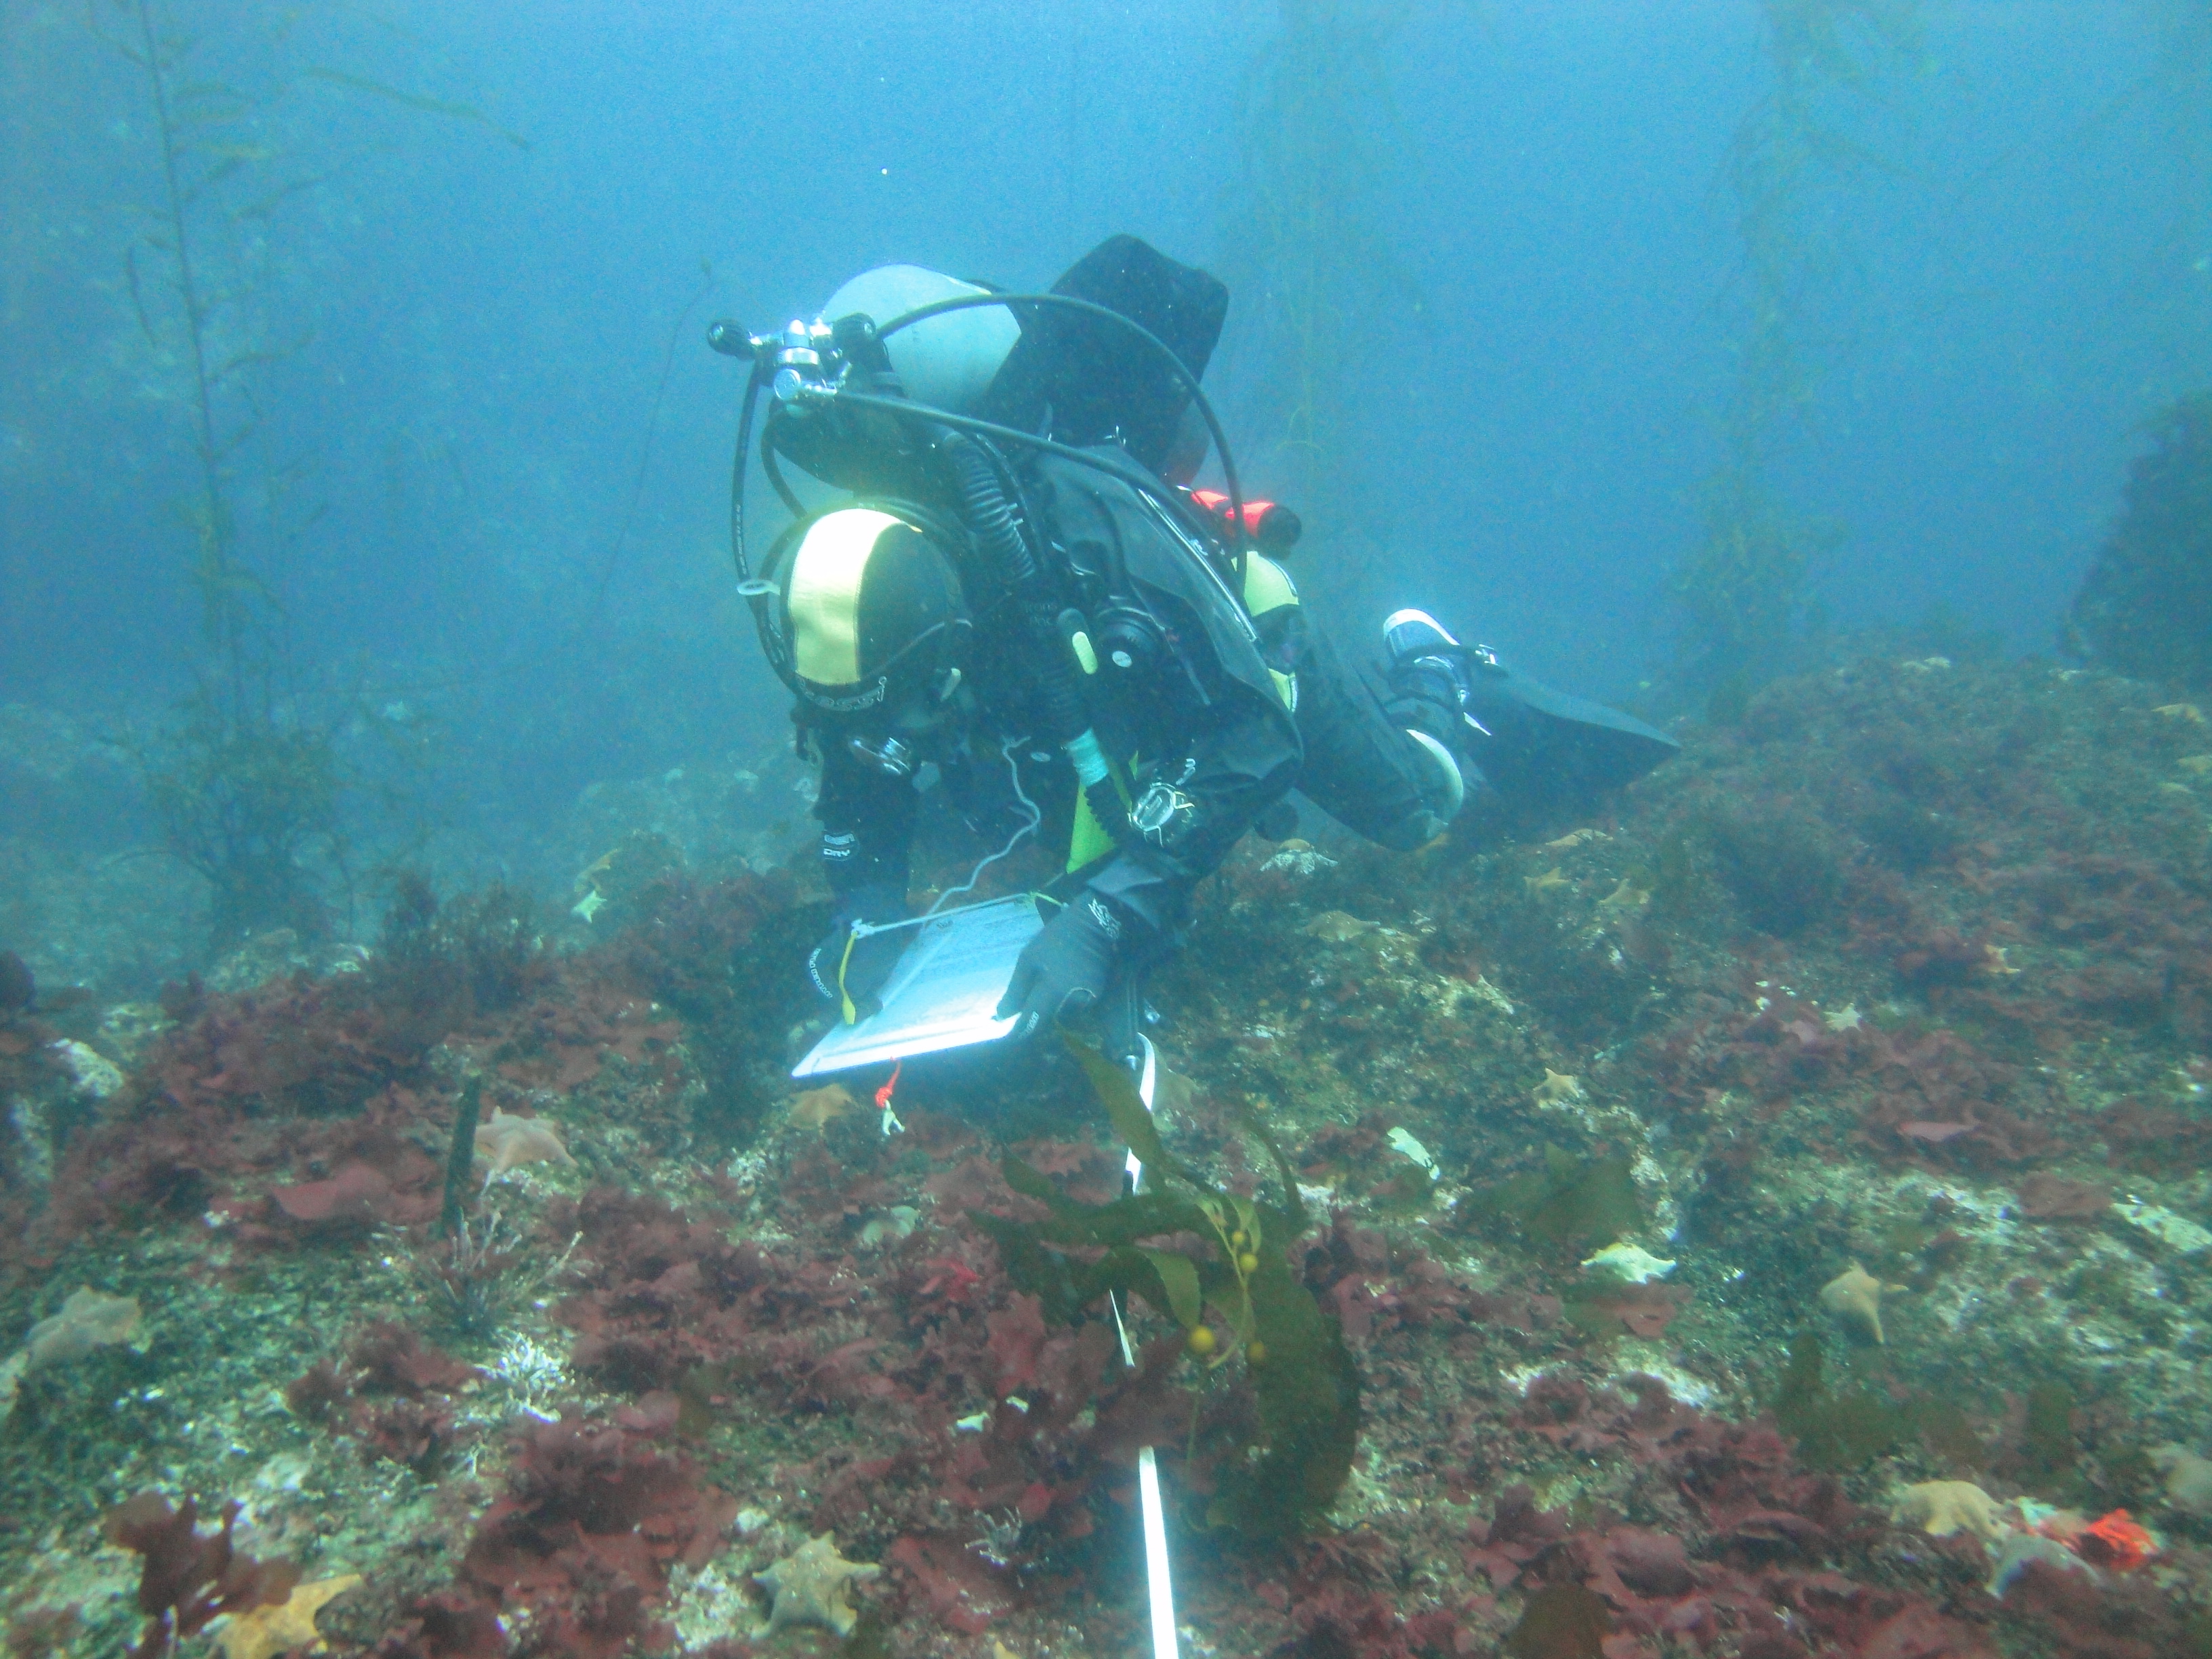 A volunteer diver with Reef Check California records species seen along the survey transect. Credit: Reef Check